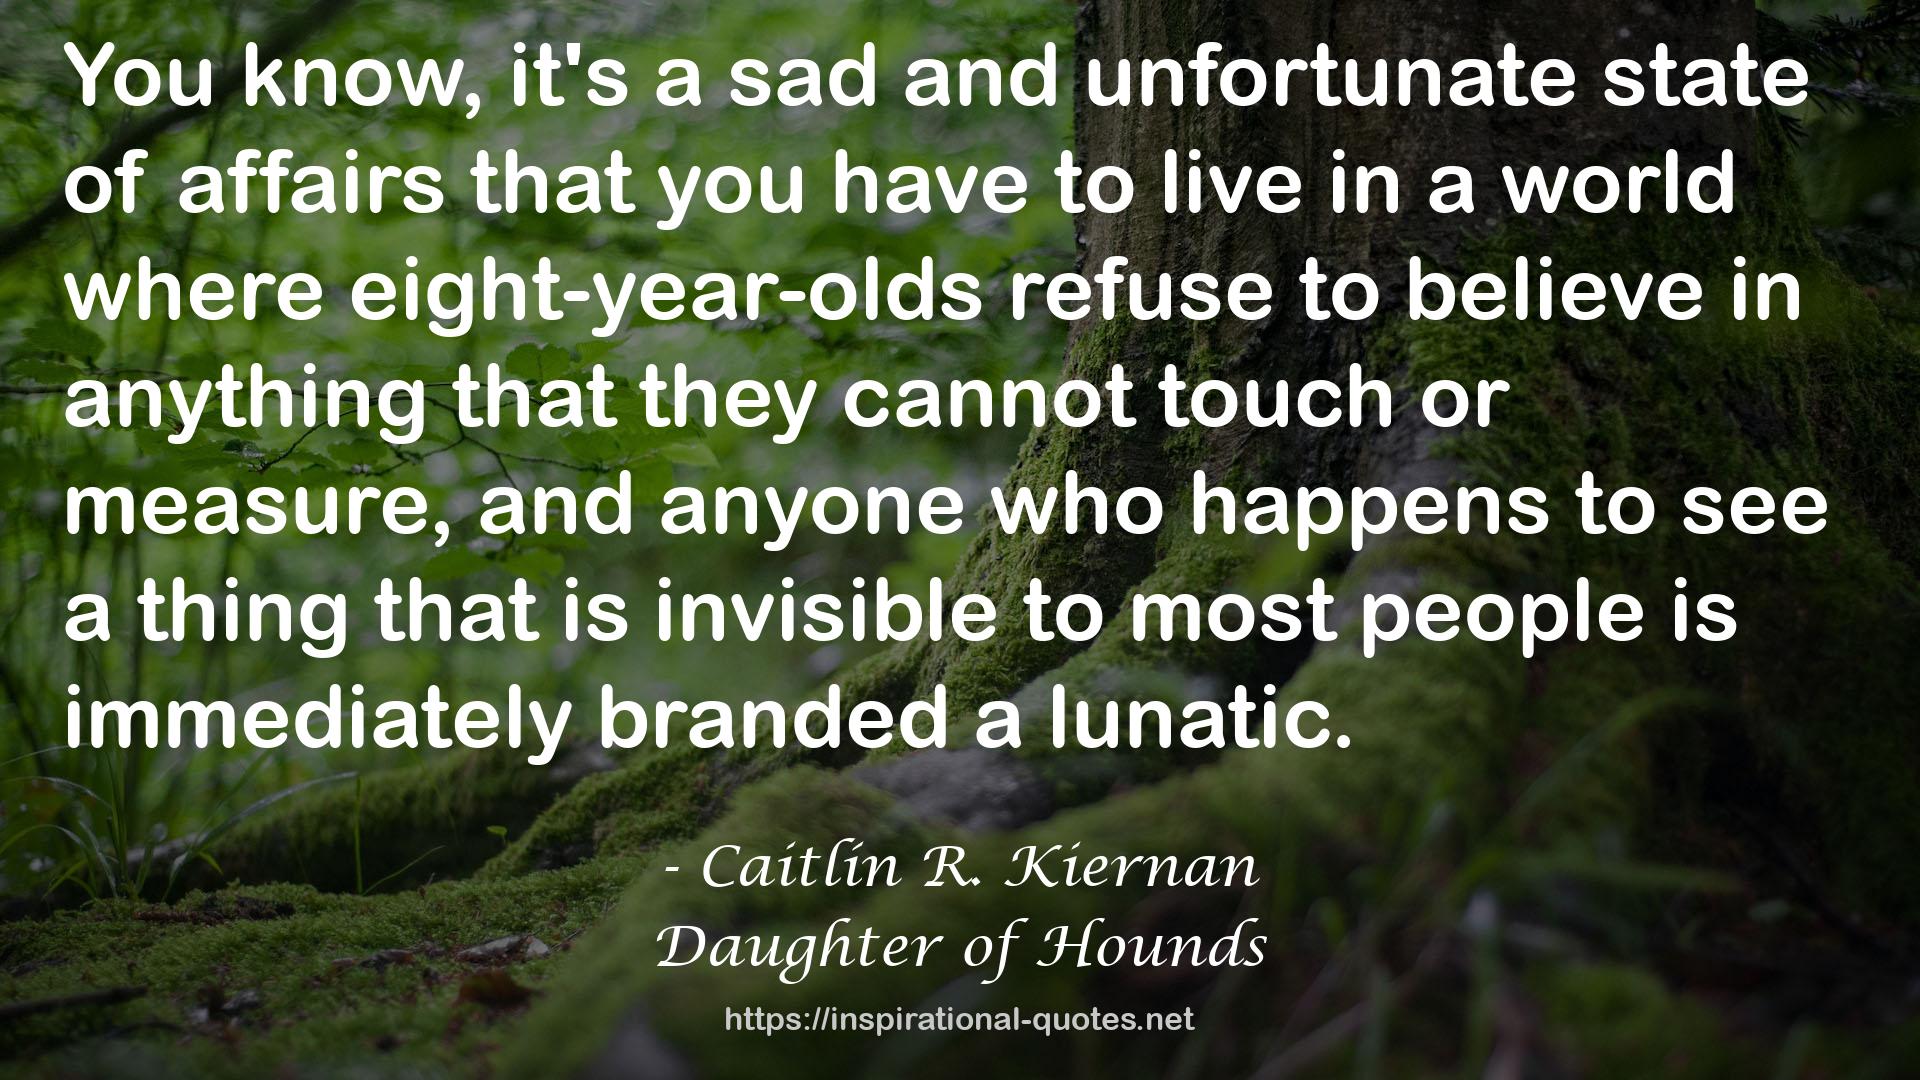 Daughter of Hounds QUOTES